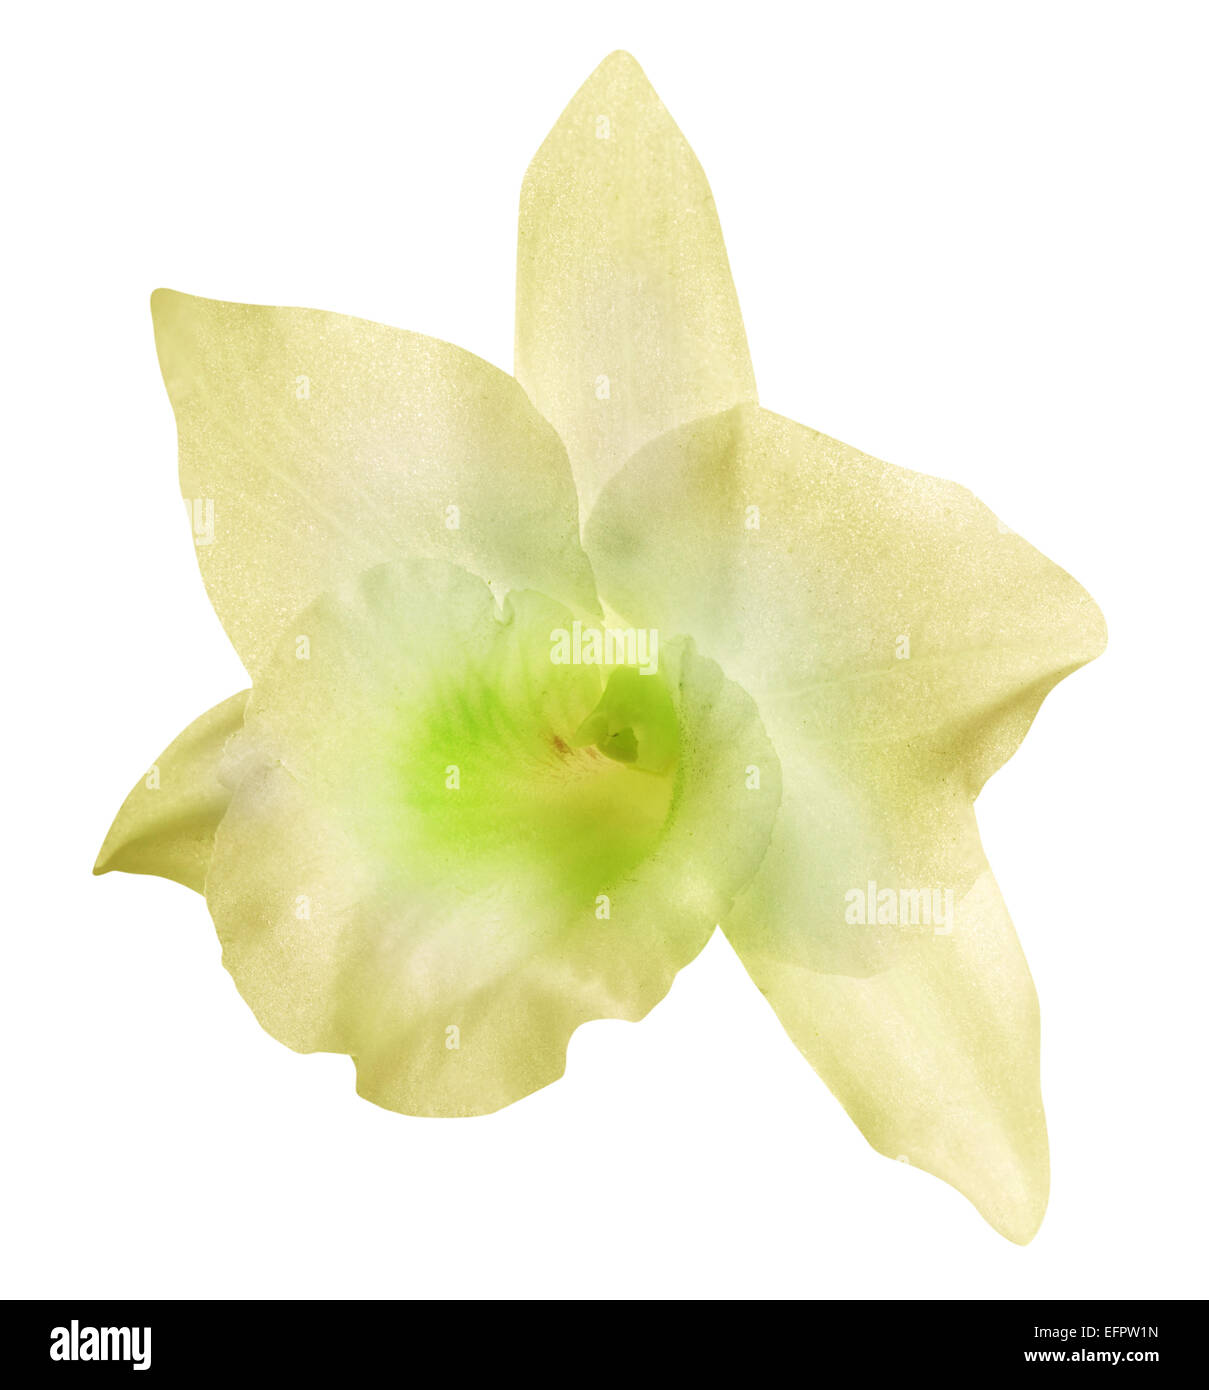 Orchid flower on white background. File contains clipping paths. Stock Photo